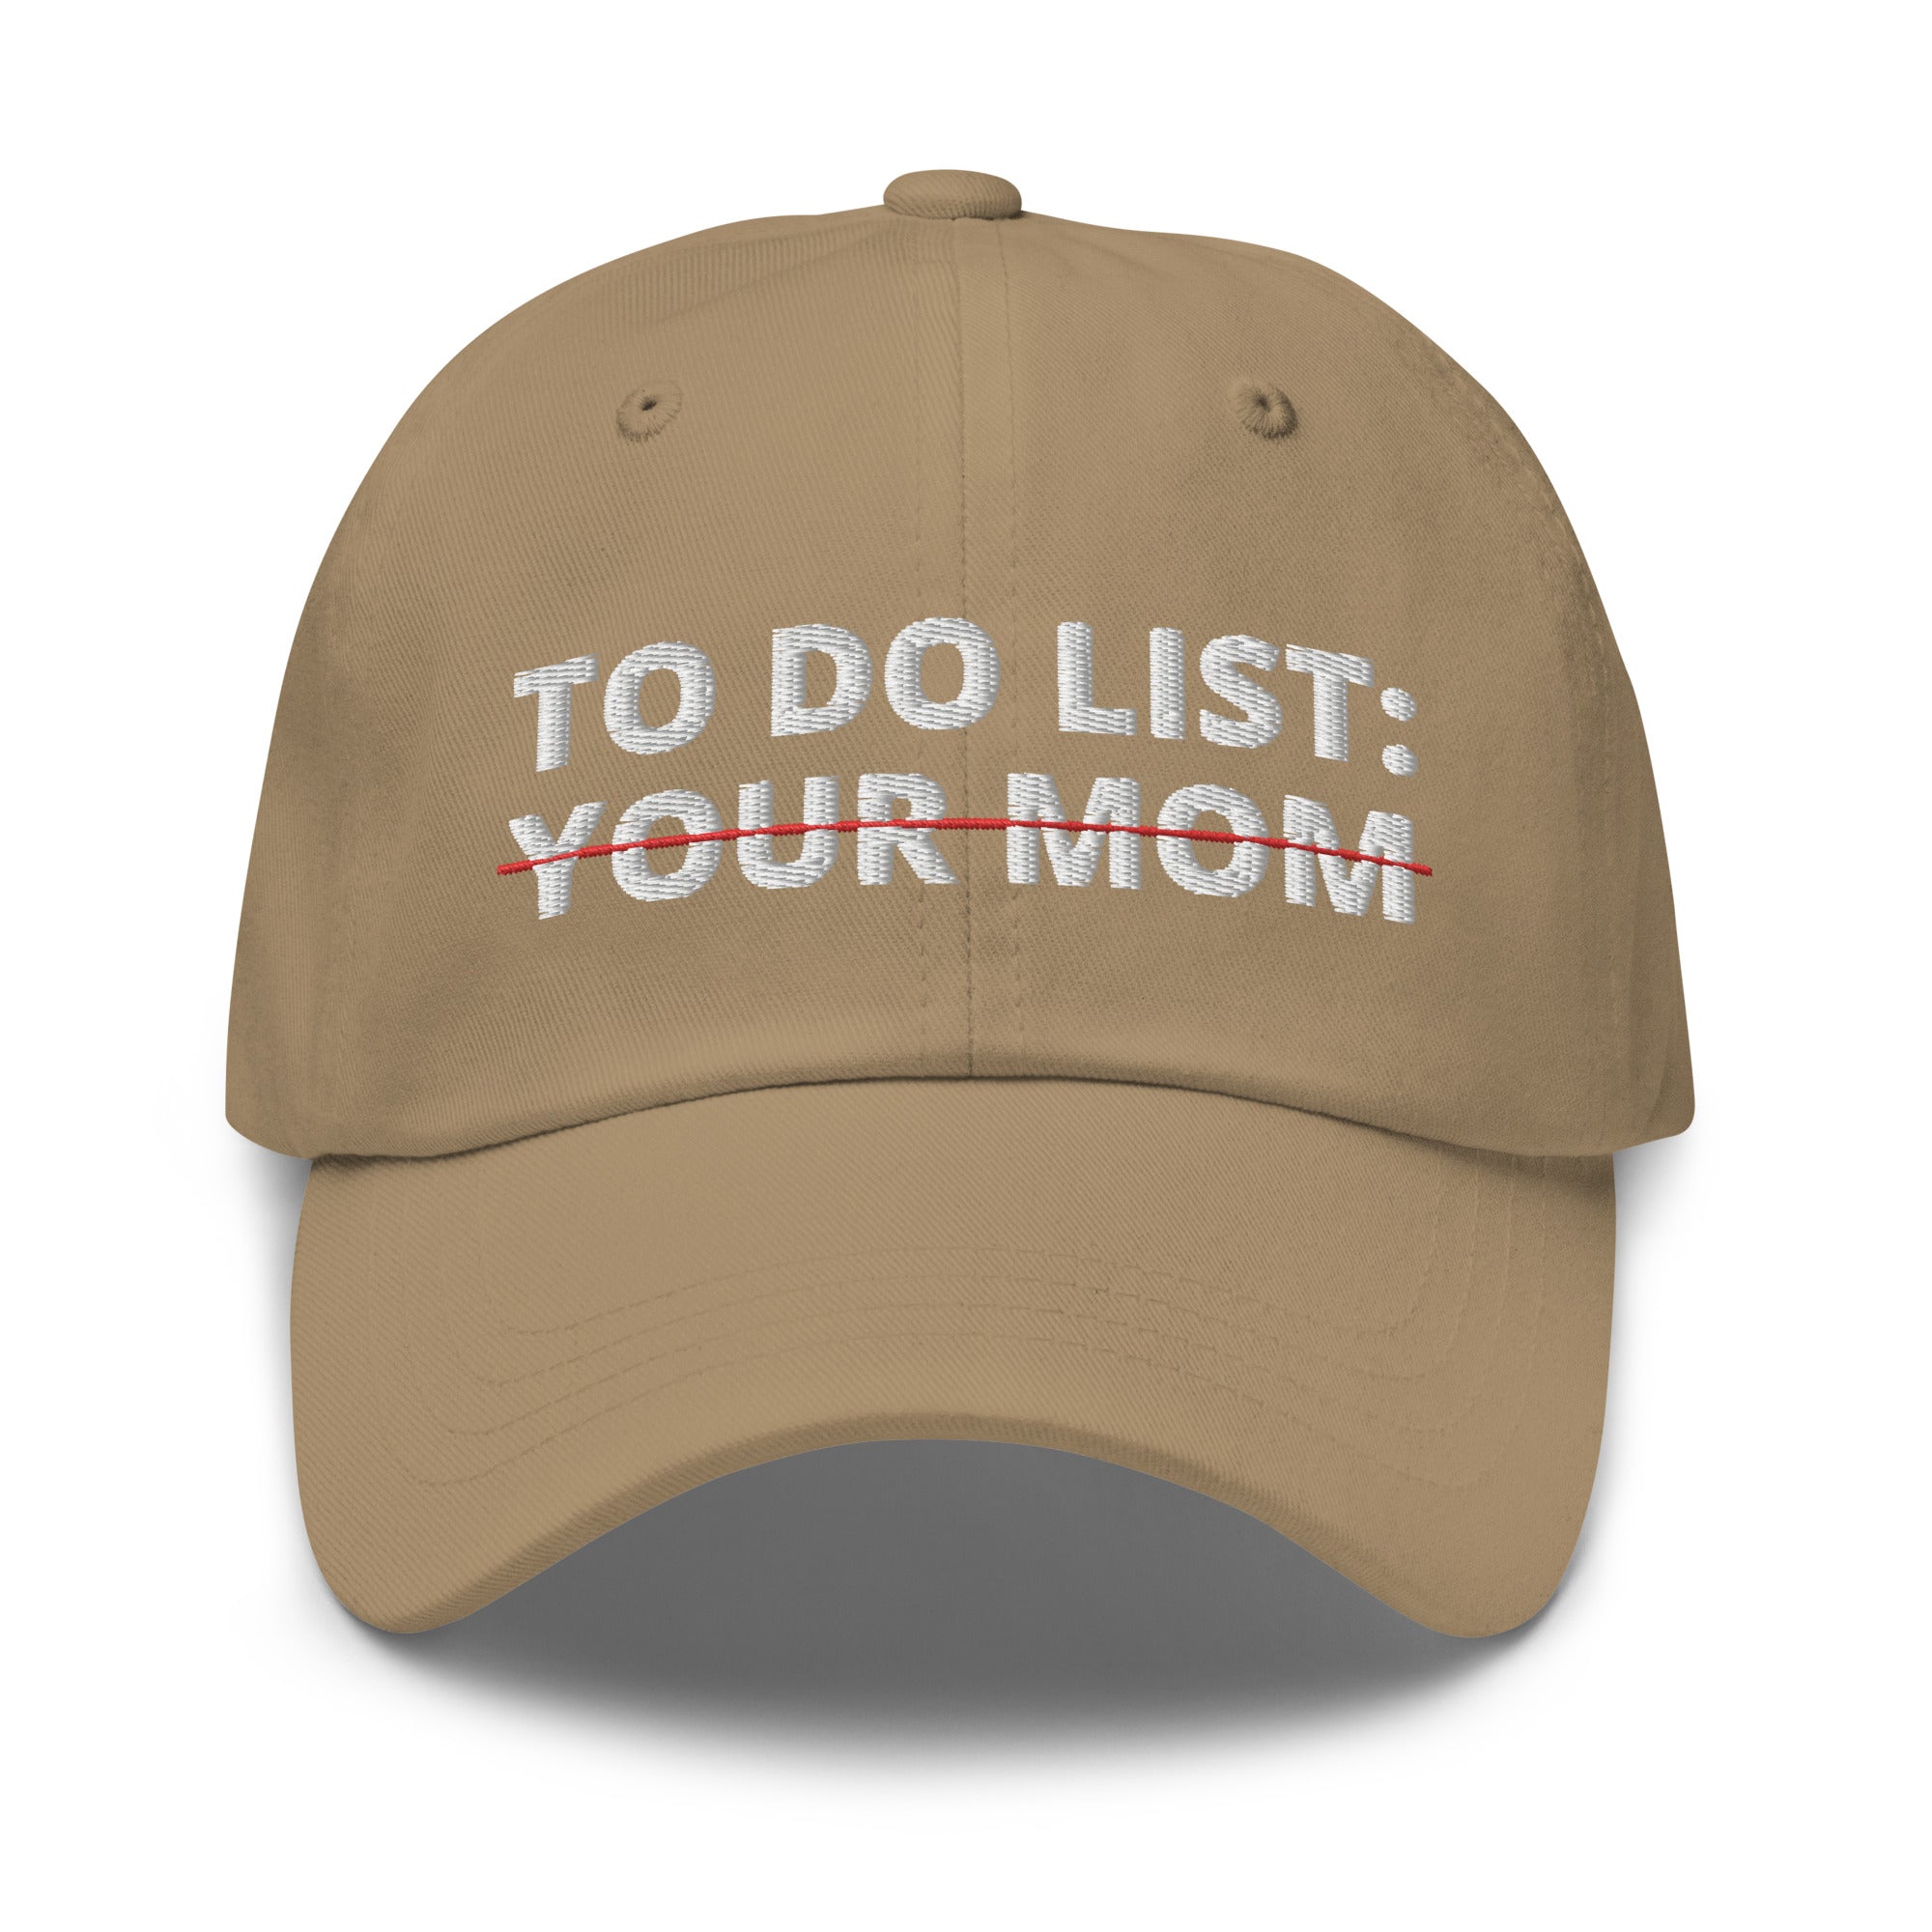 To Do List Your Mom Hat, Funny To Do List, Sarcastic To Do List, Sarcastic Gifts, Adult Humor Hat, Your Mom Cap, Funny Mom Jokes, Funny Hats